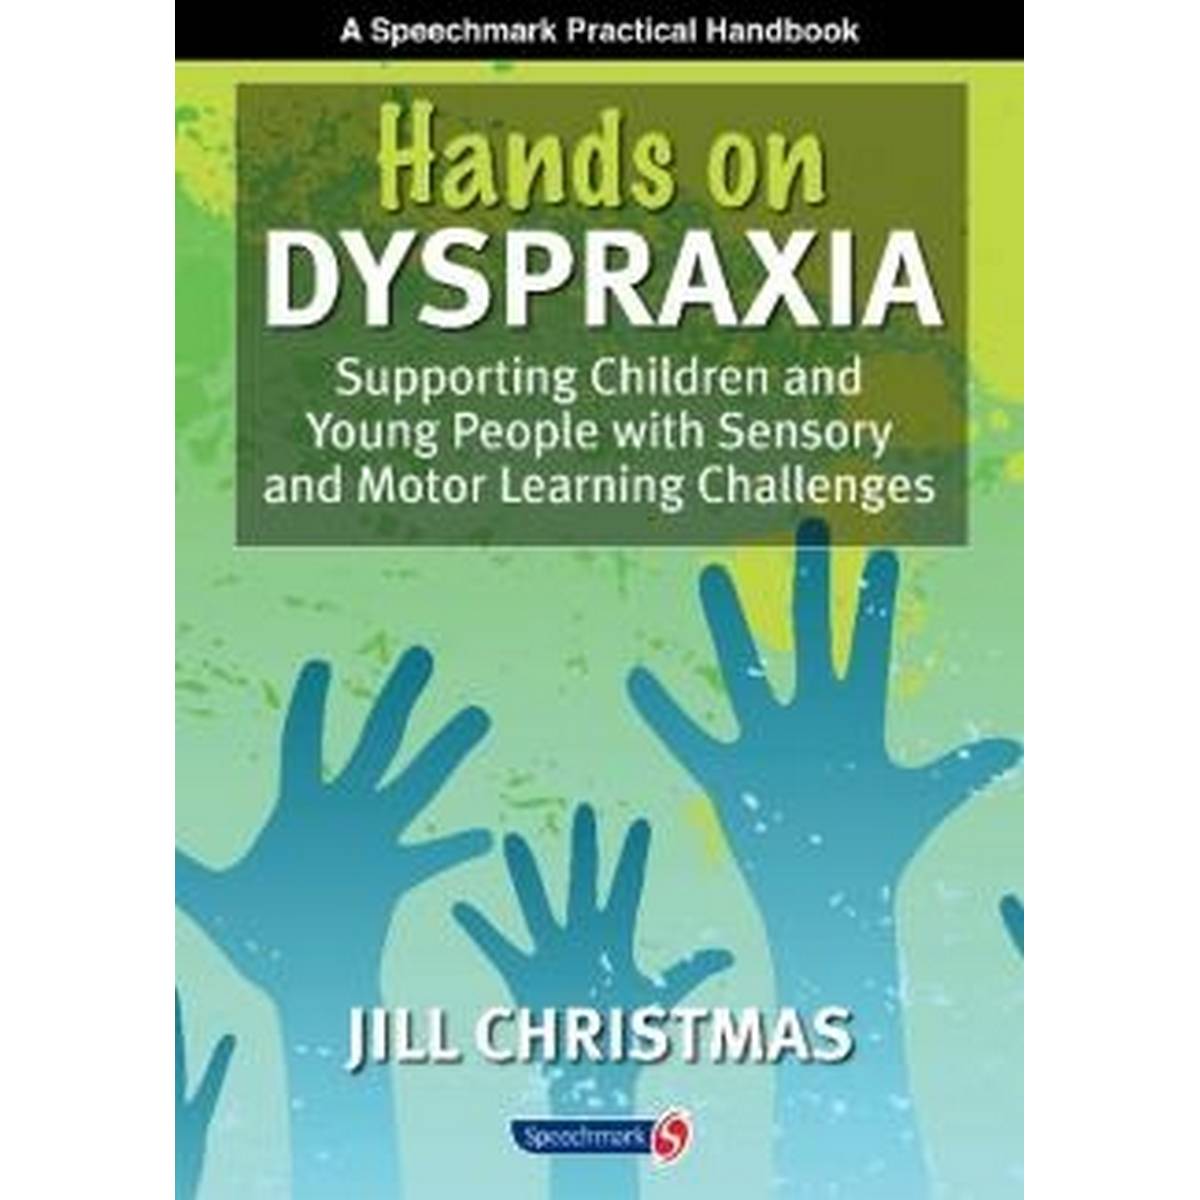 Hands on Dyspraxia: Supporting Children and Young People with Sensory and Motor Challenges